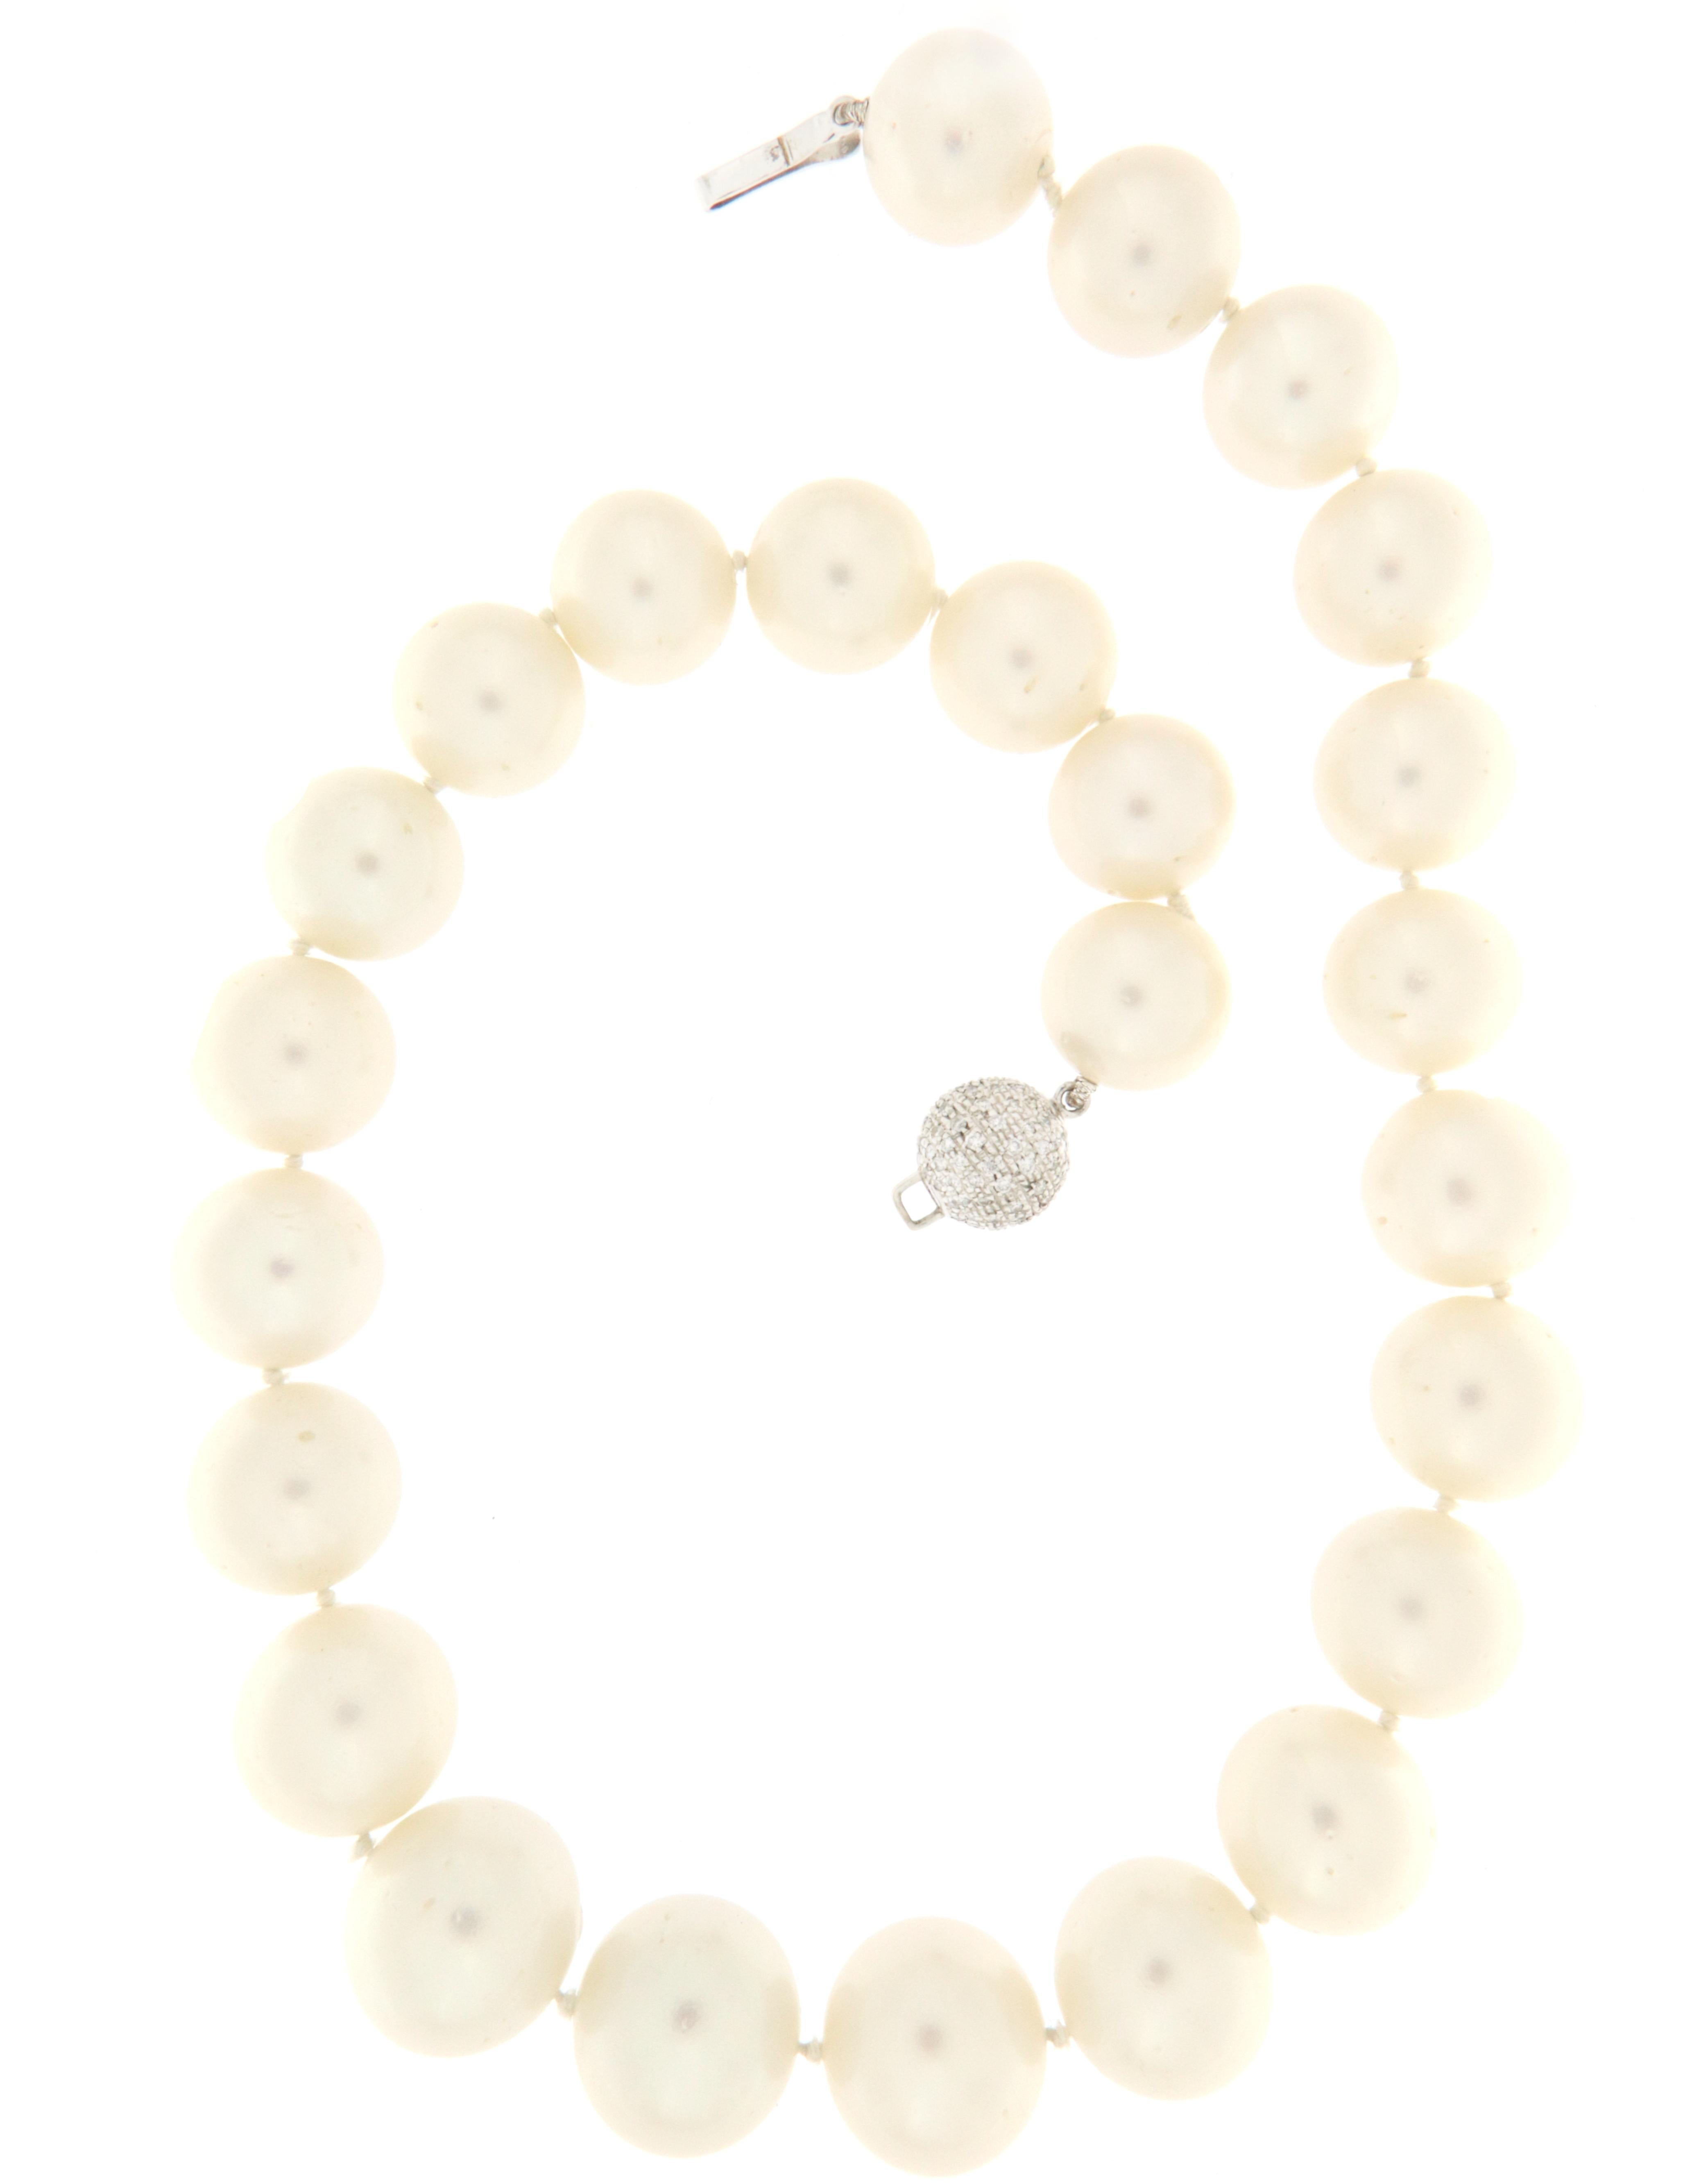 Brilliant Cut South Sea Pearls Diamonds 18 Karat White Gold Strand Rope Necklace For Sale